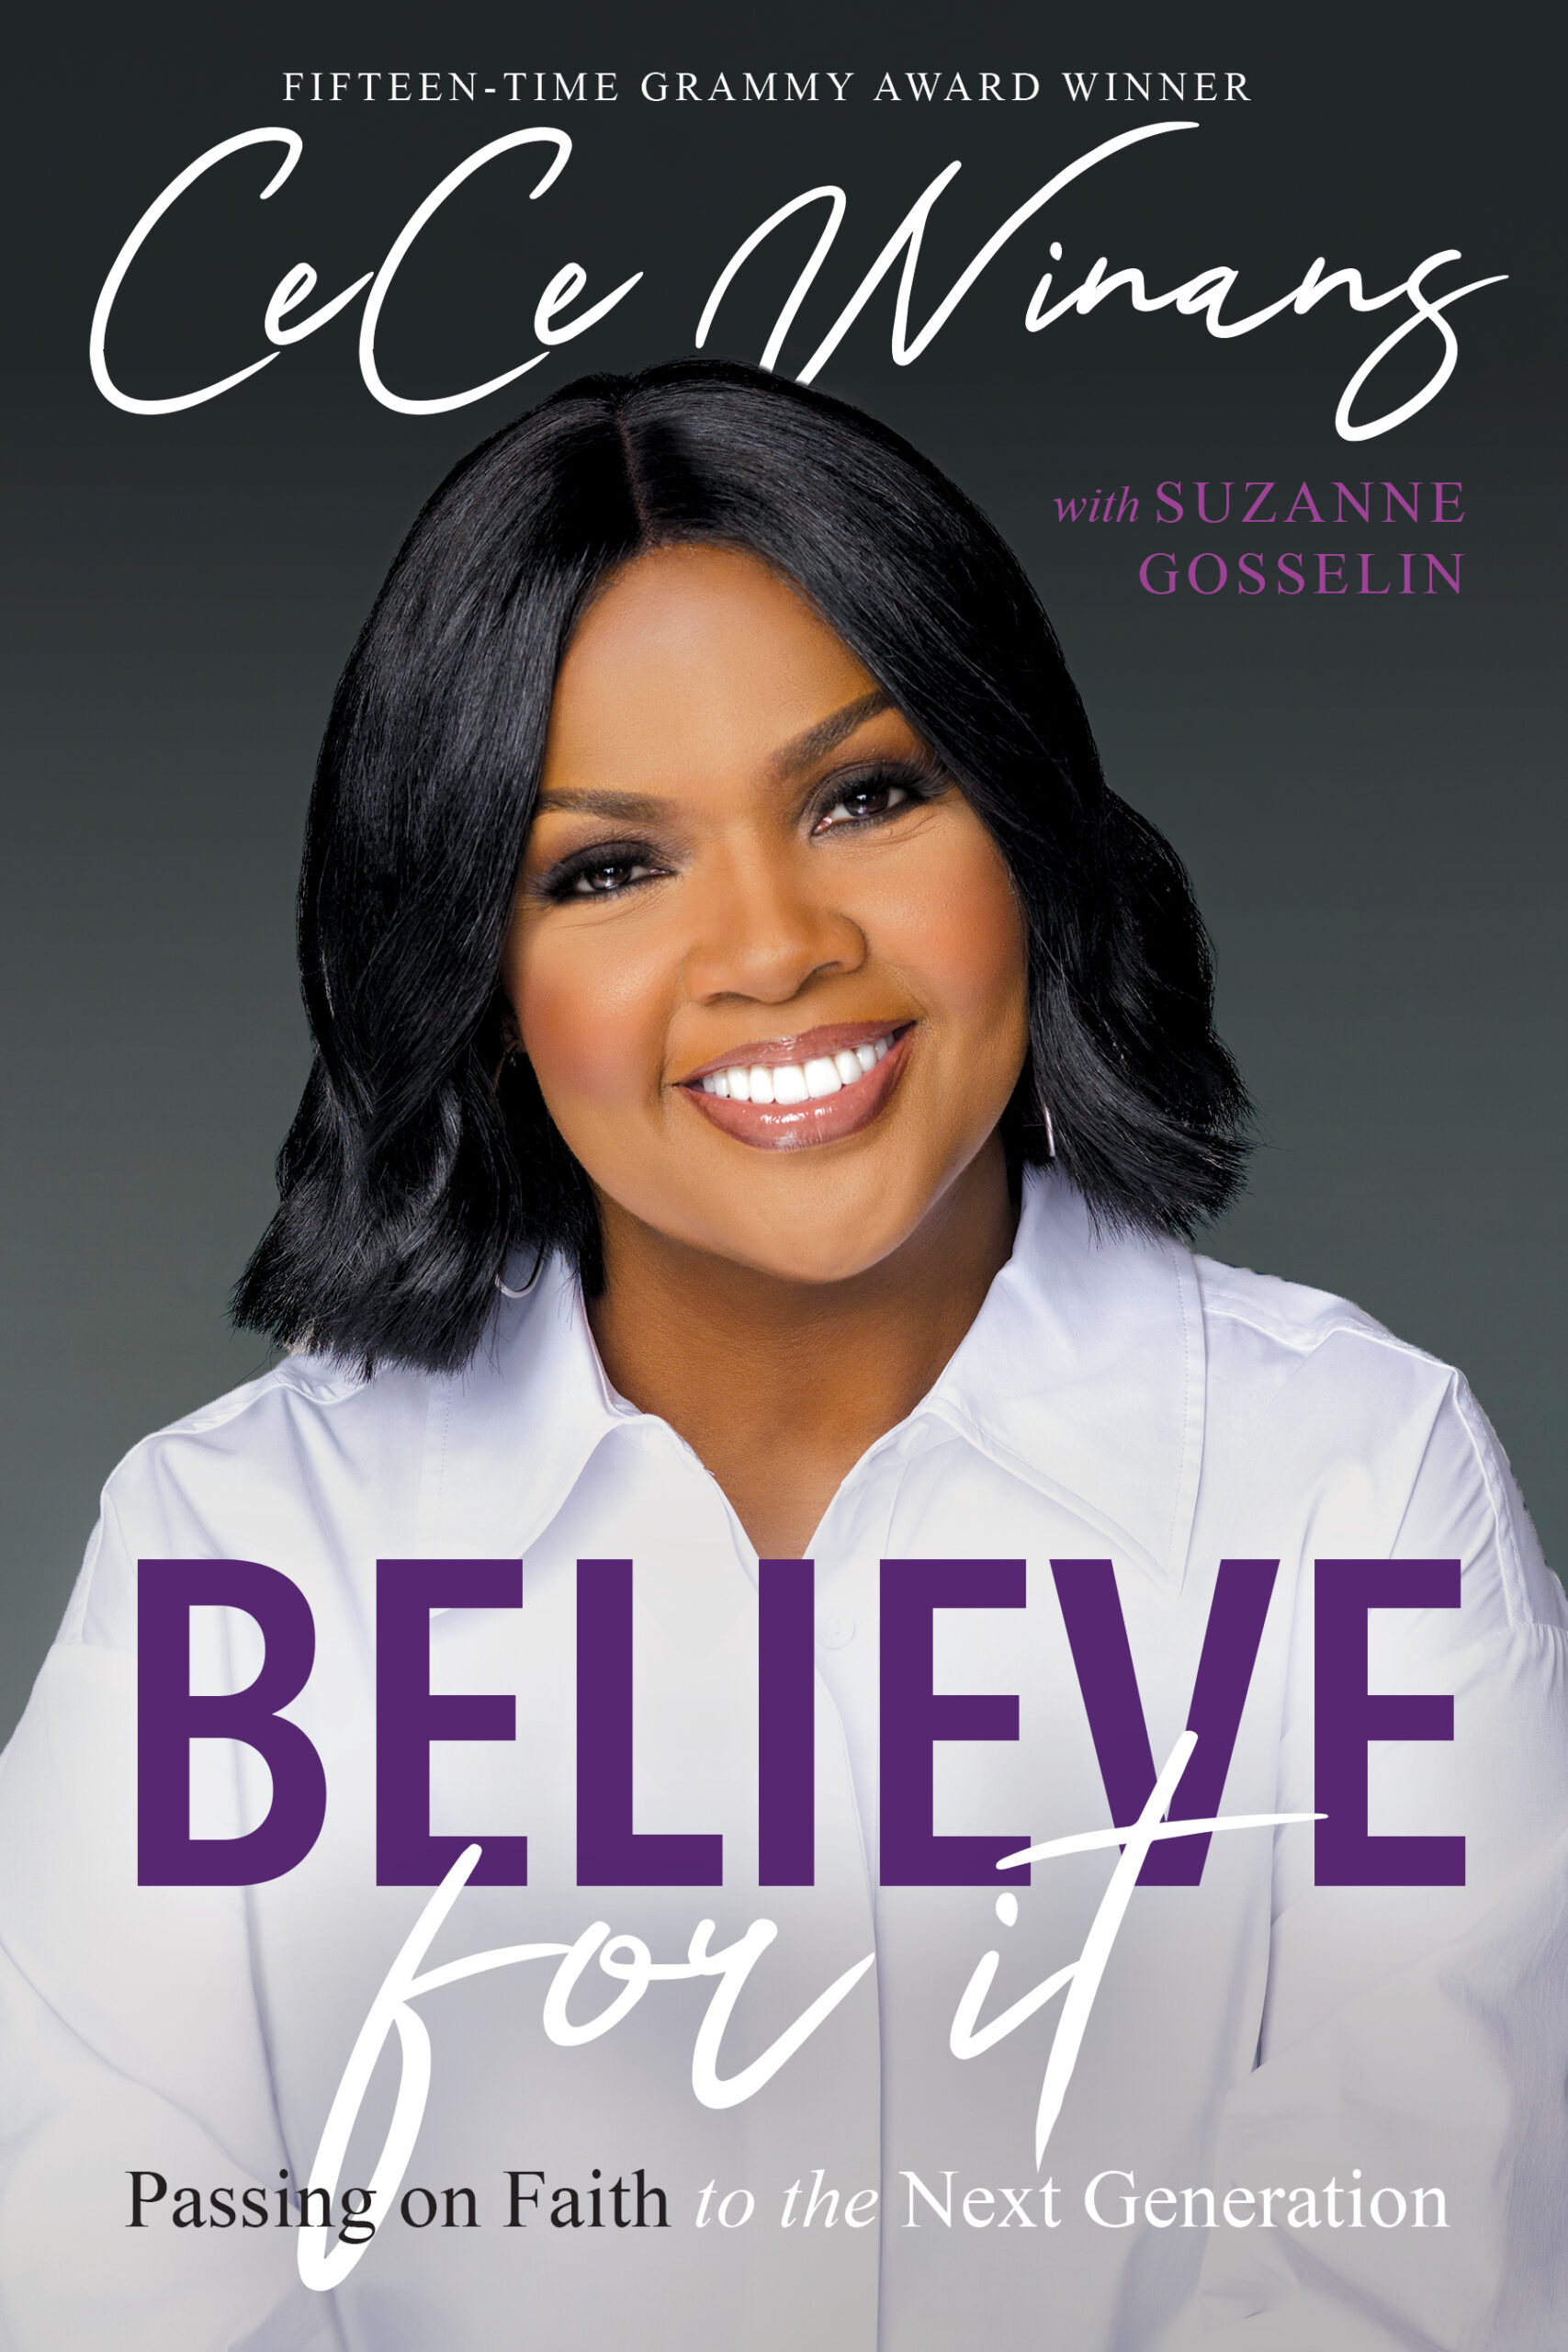 Believe for It book cover shows a photo of CeCe Winans in a white button down with the title in purple and white type